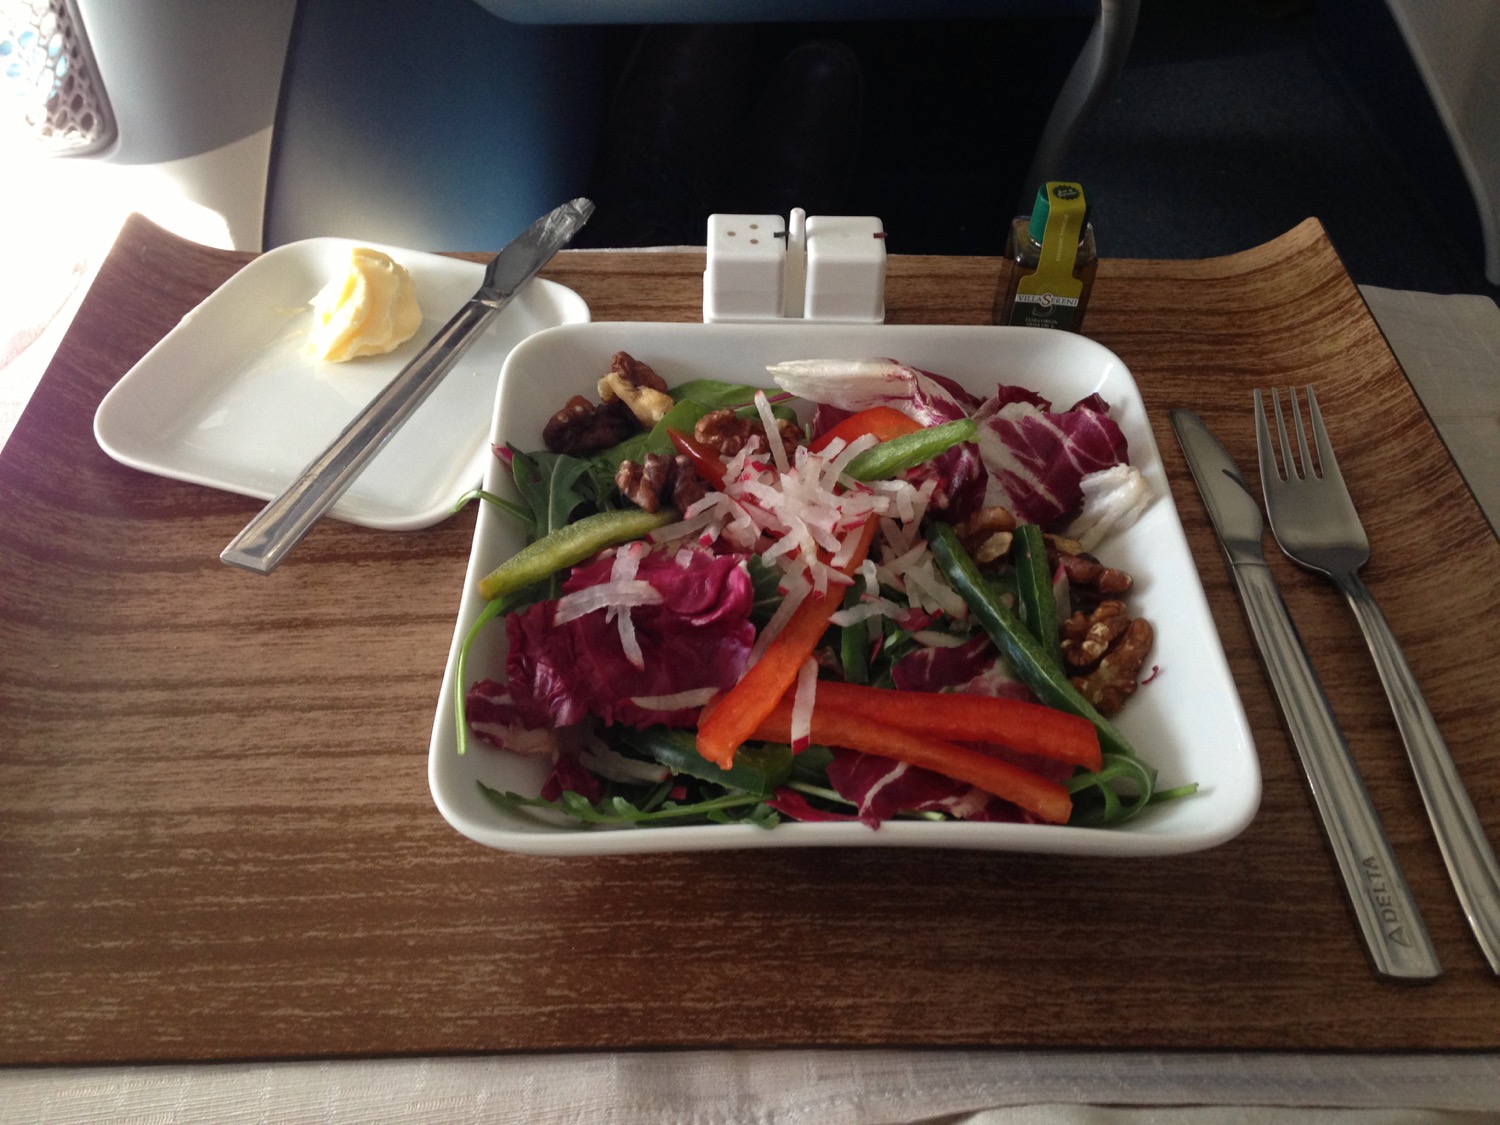 Delta One Business Class Meal - 8